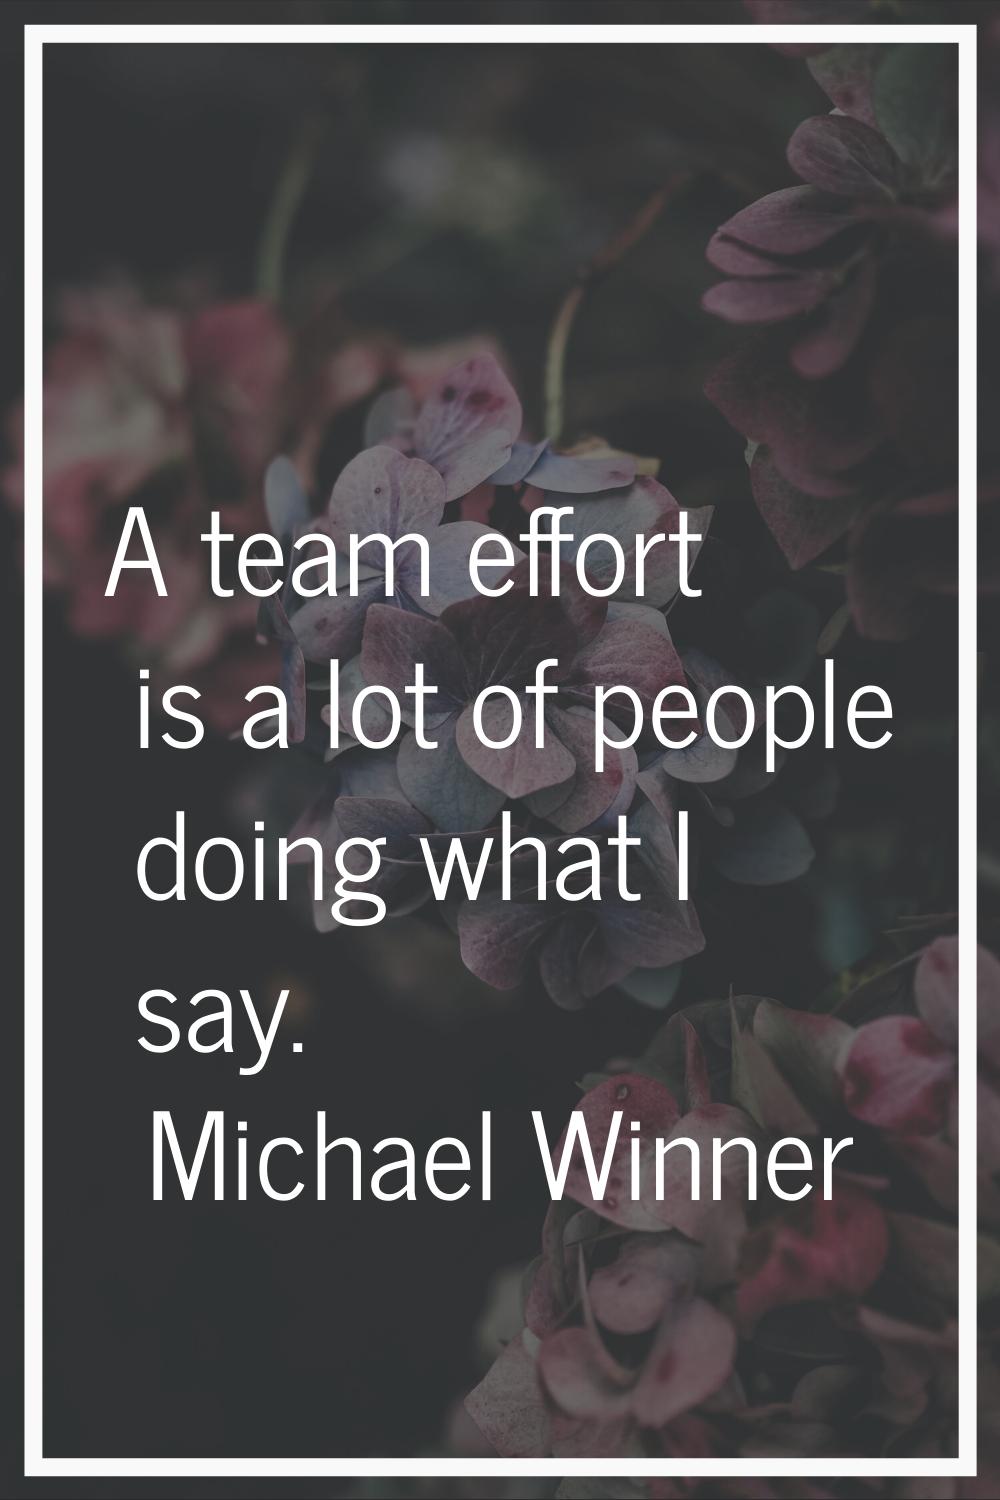 A team effort is a lot of people doing what I say.